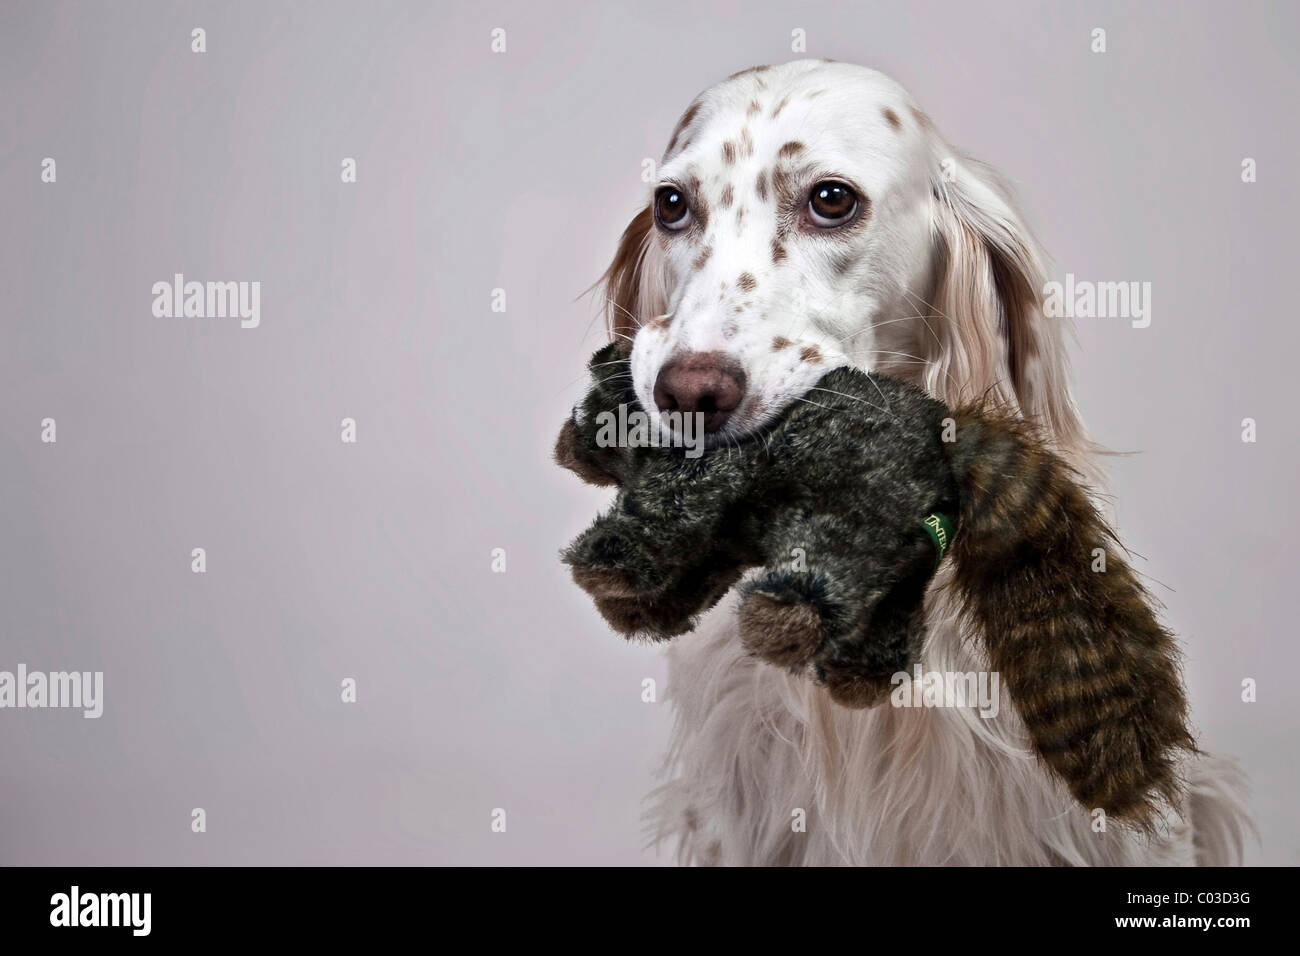 English Setter has a soft toy in its mouth Stock Photo